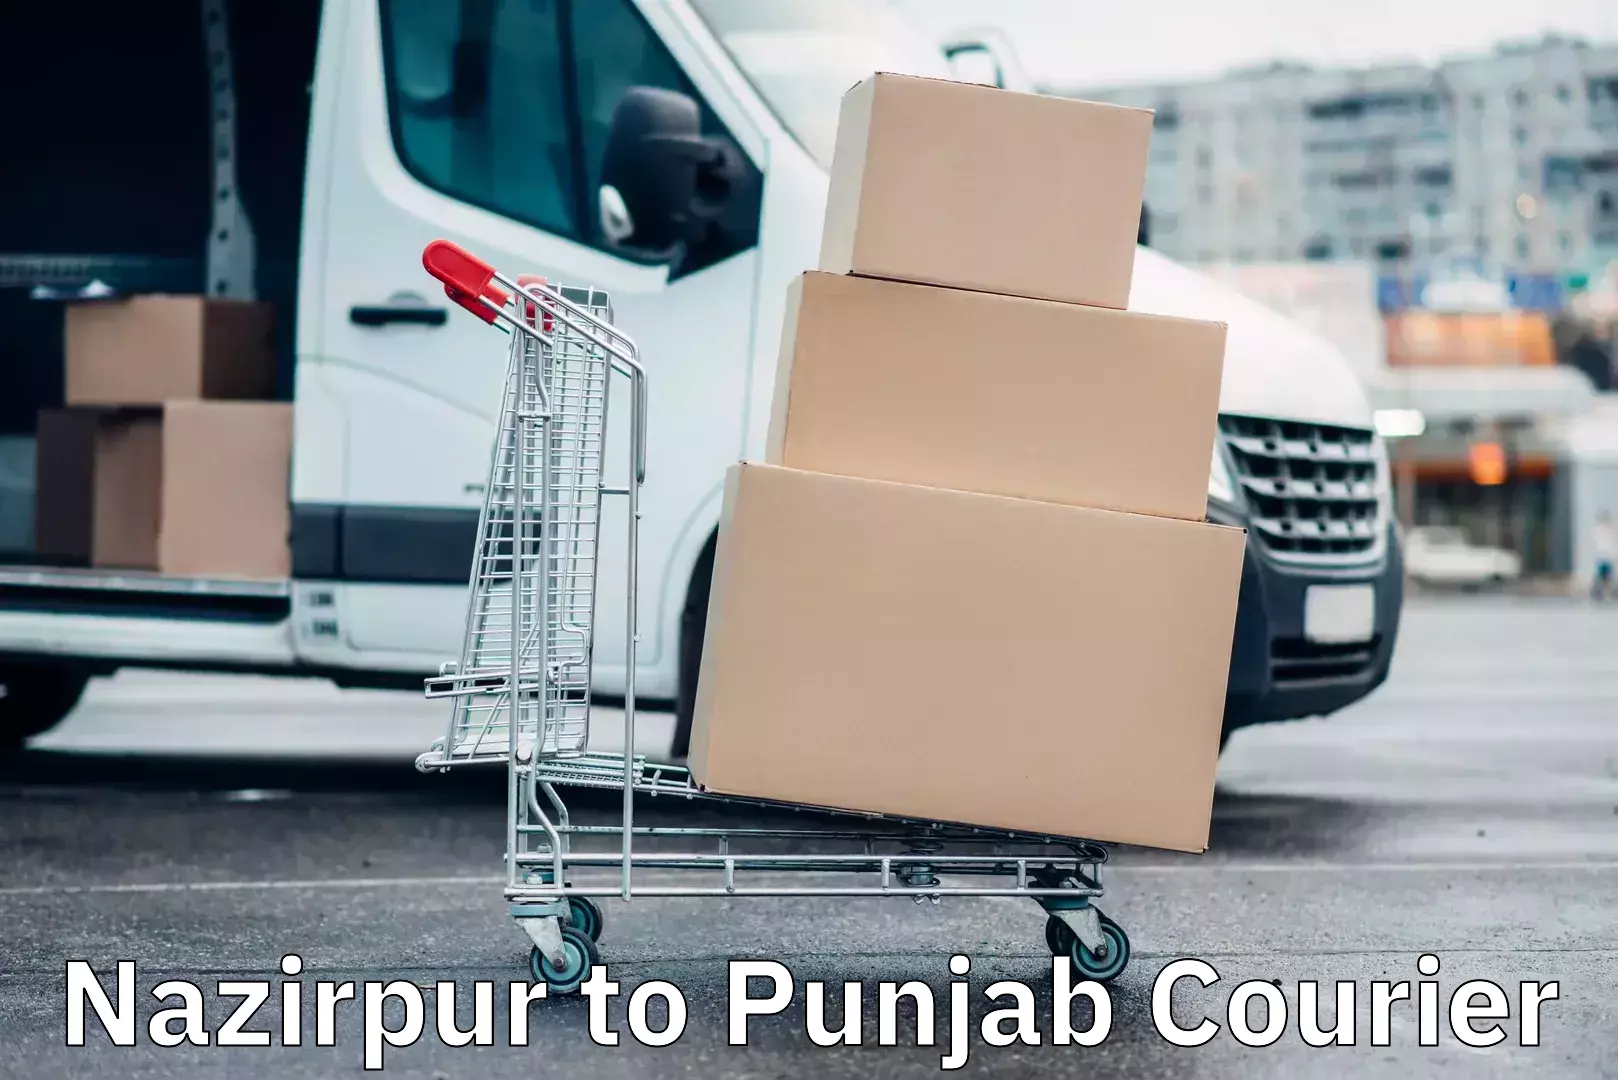 Same-day delivery solutions Nazirpur to Abohar